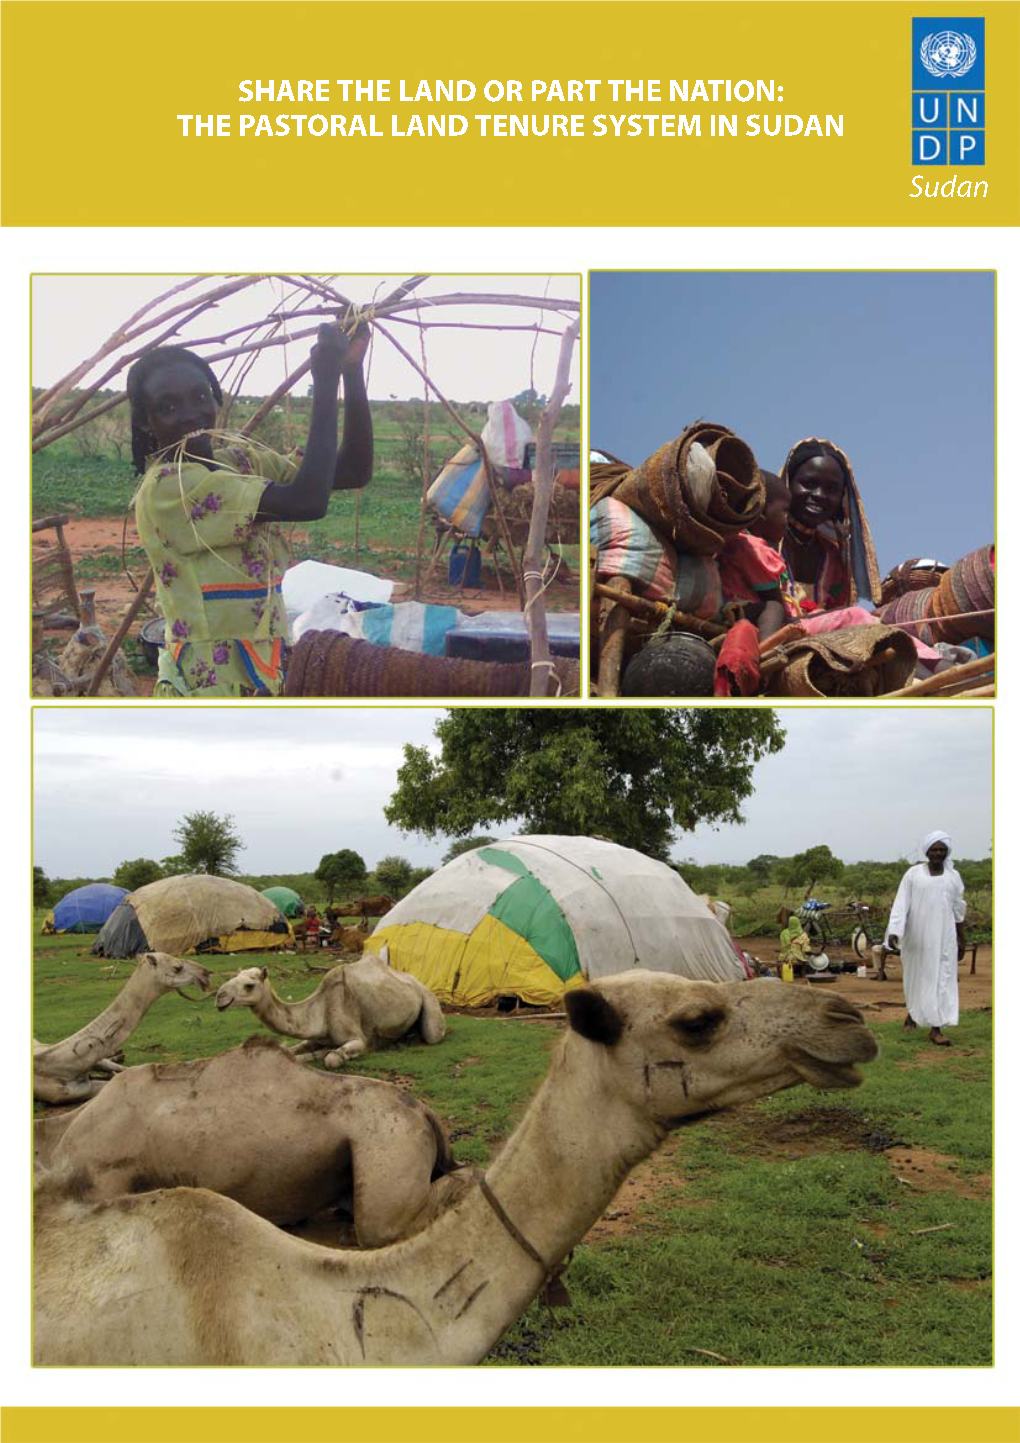 The Pastoral Land Tenure System in Sudan (STUDY 3)